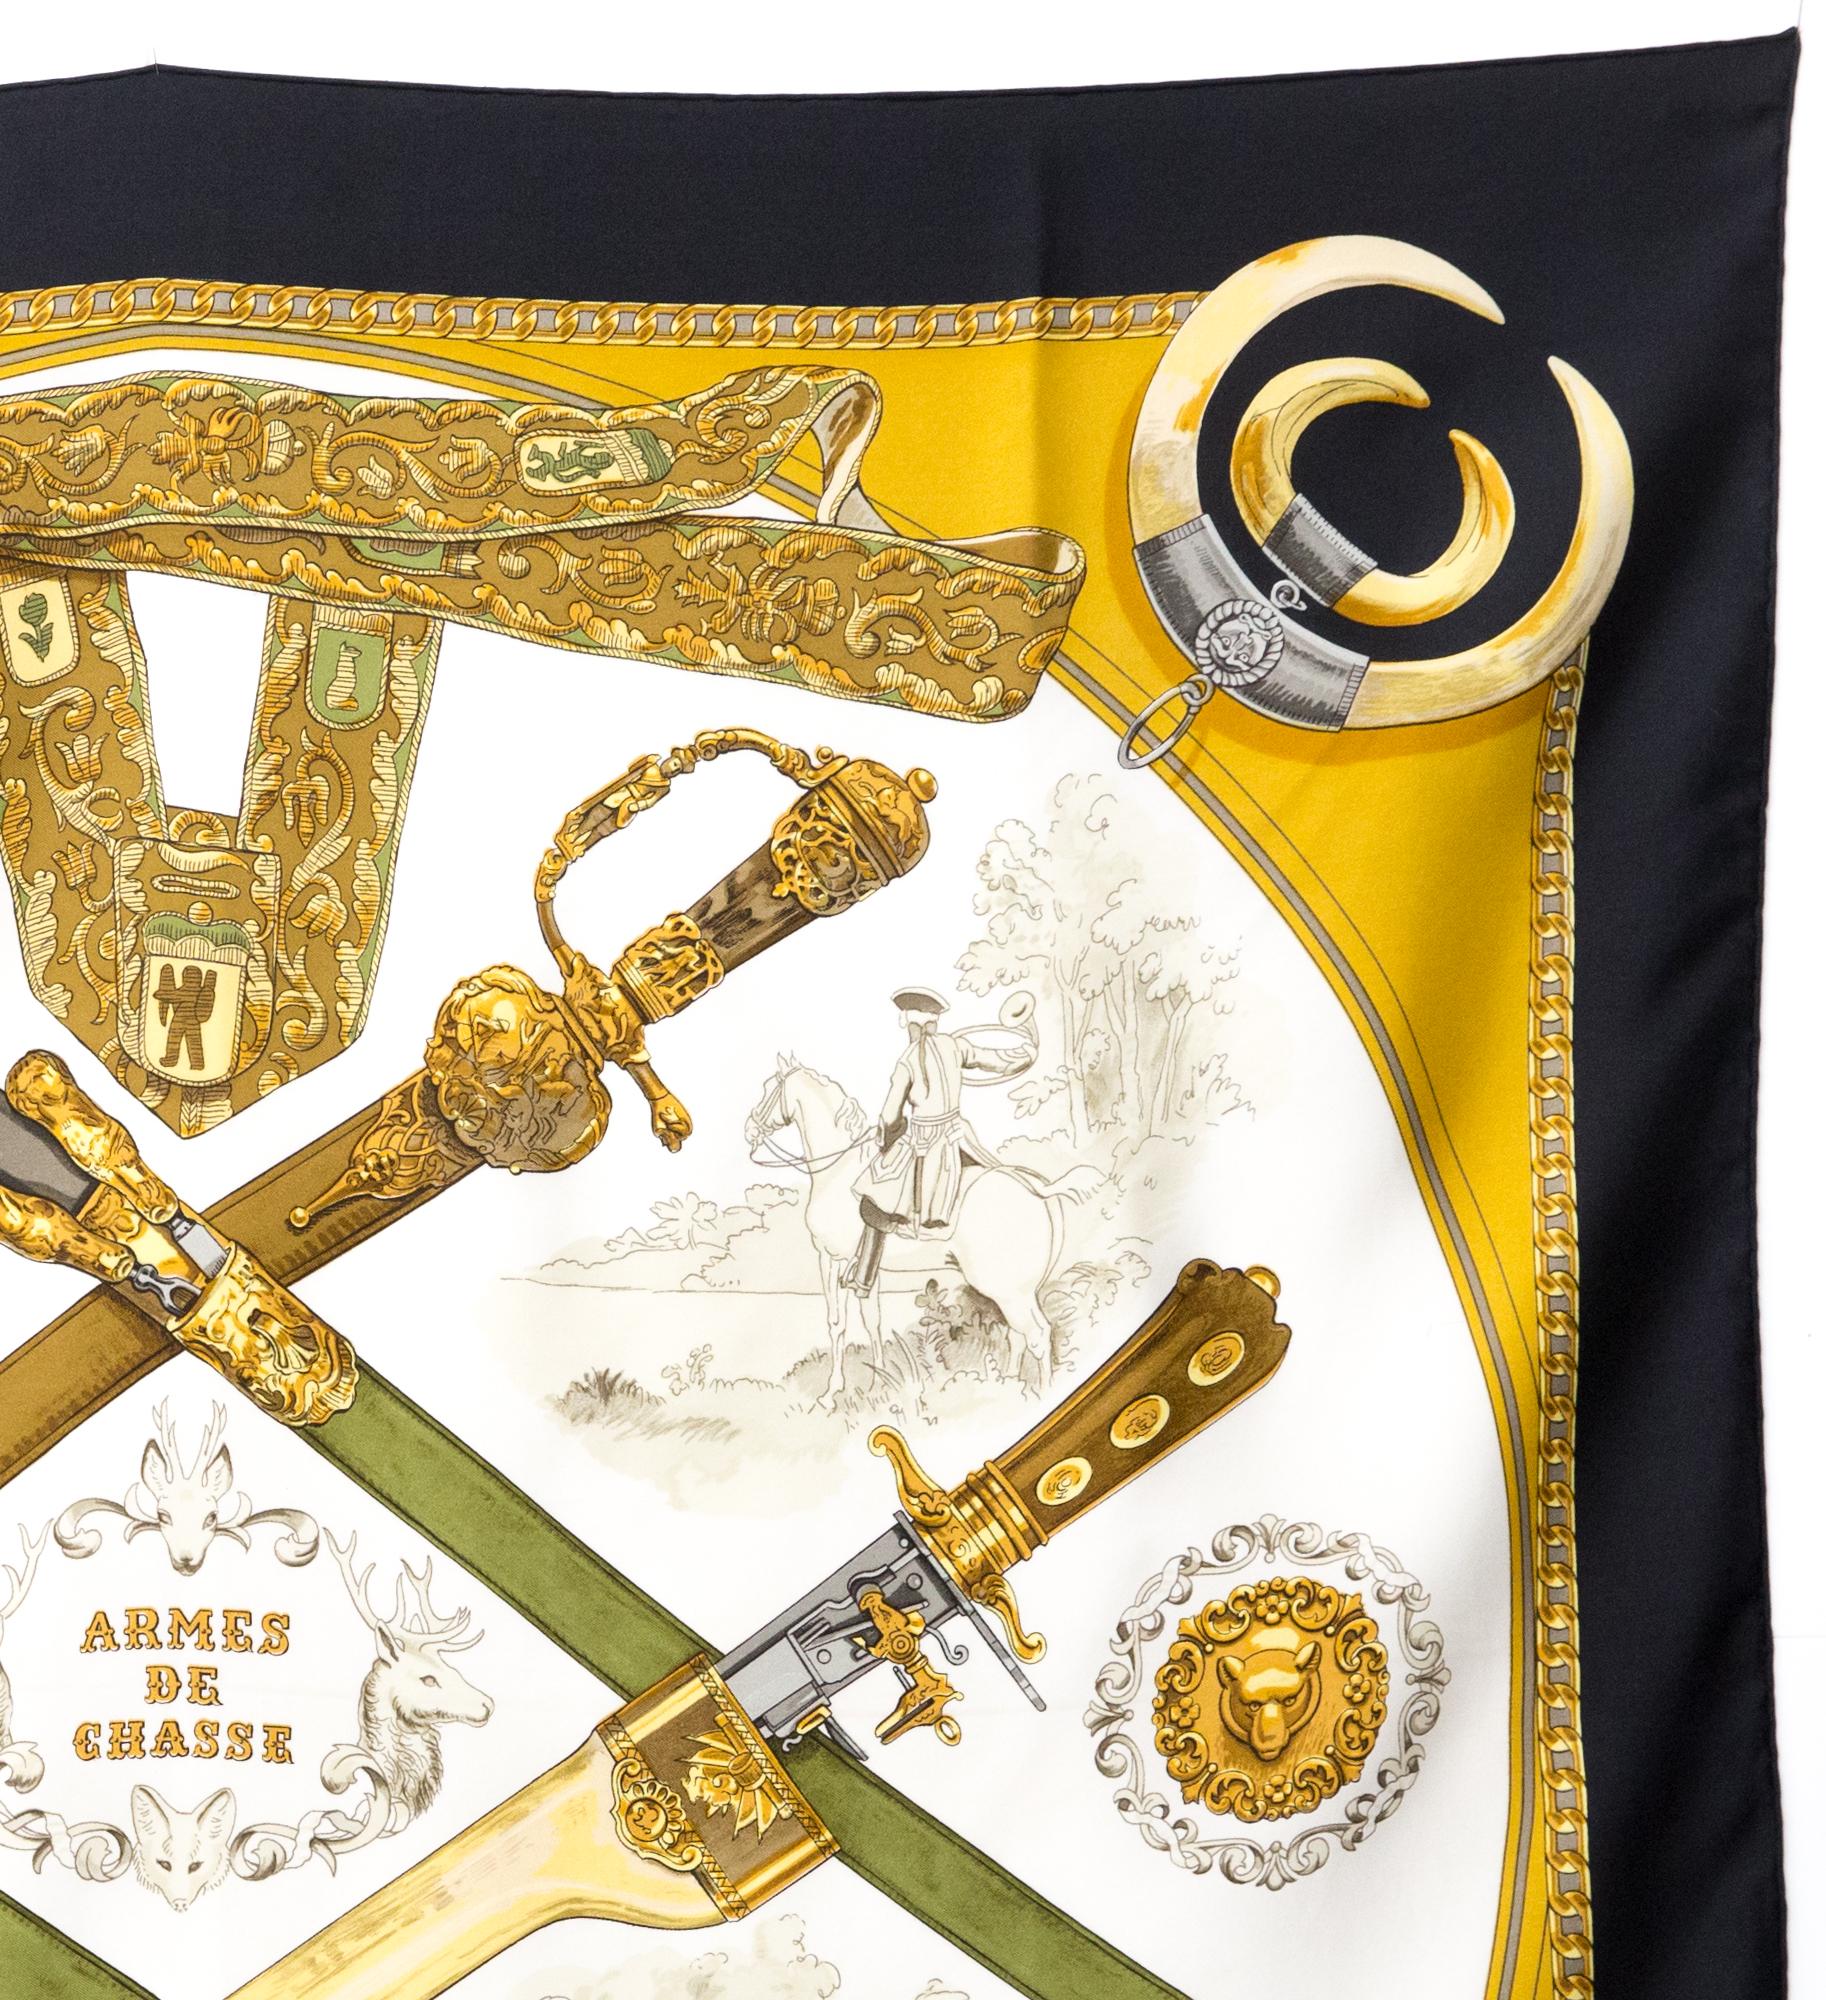 Hermes Armes de chasse by Philippe Ledoux Silk Scarf In Good Condition For Sale In Paris, FR